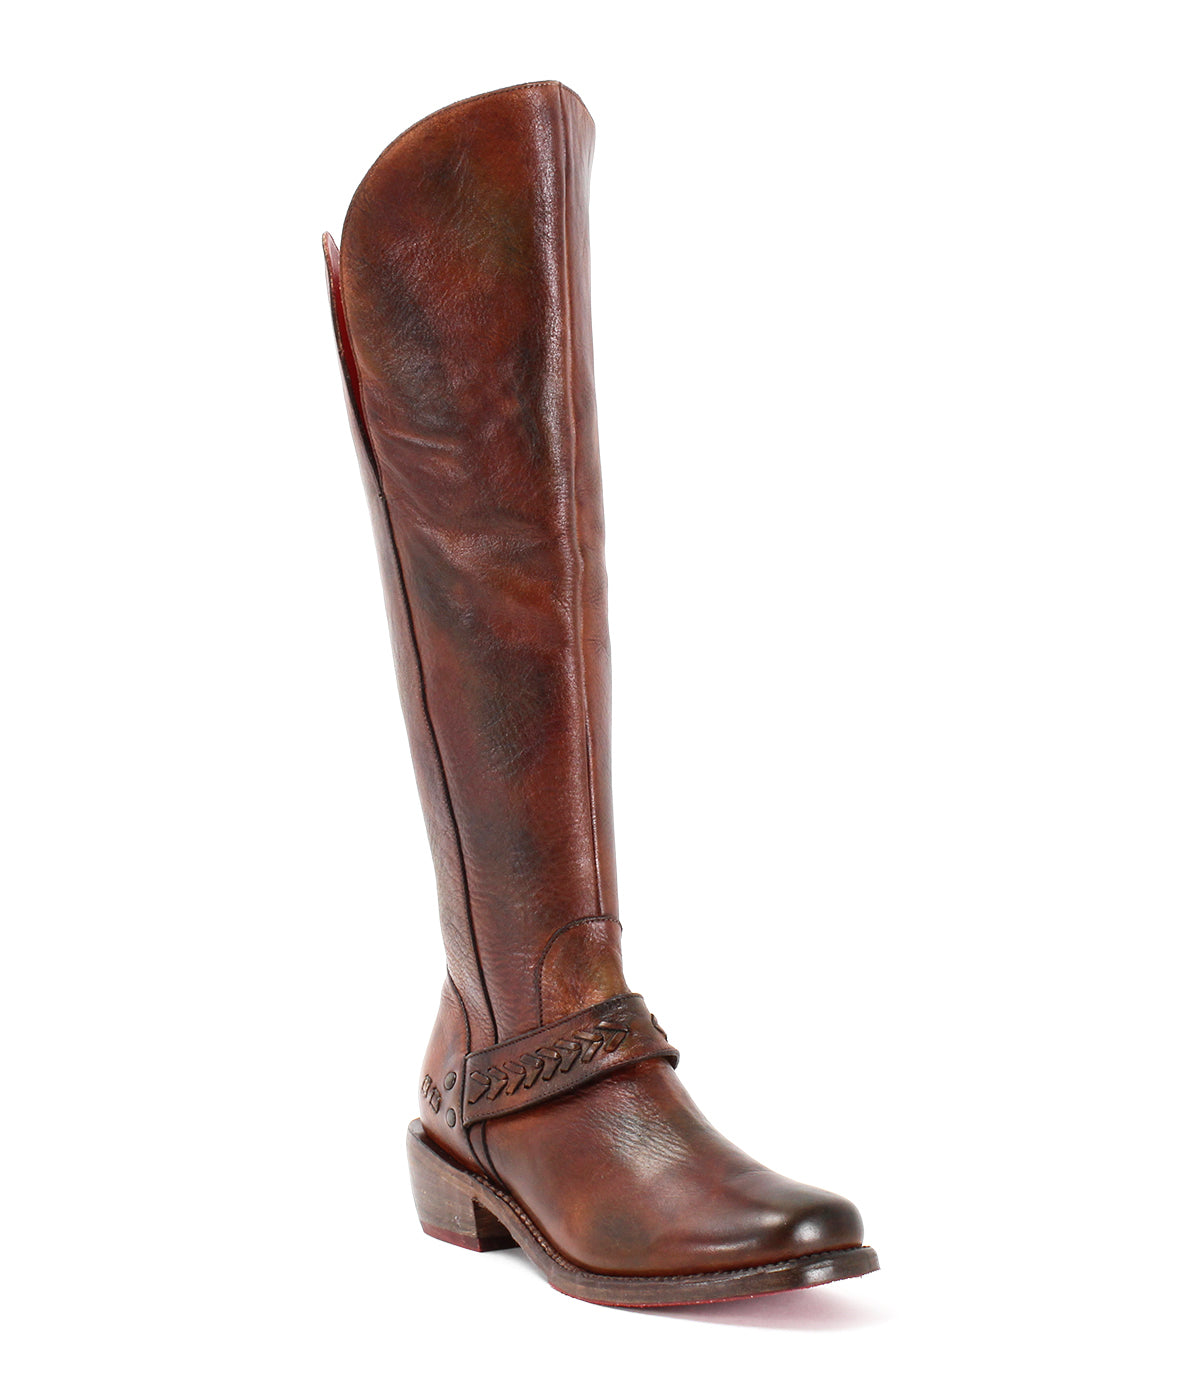 A Takoma women's brown leather riding boot from Bed Stu.